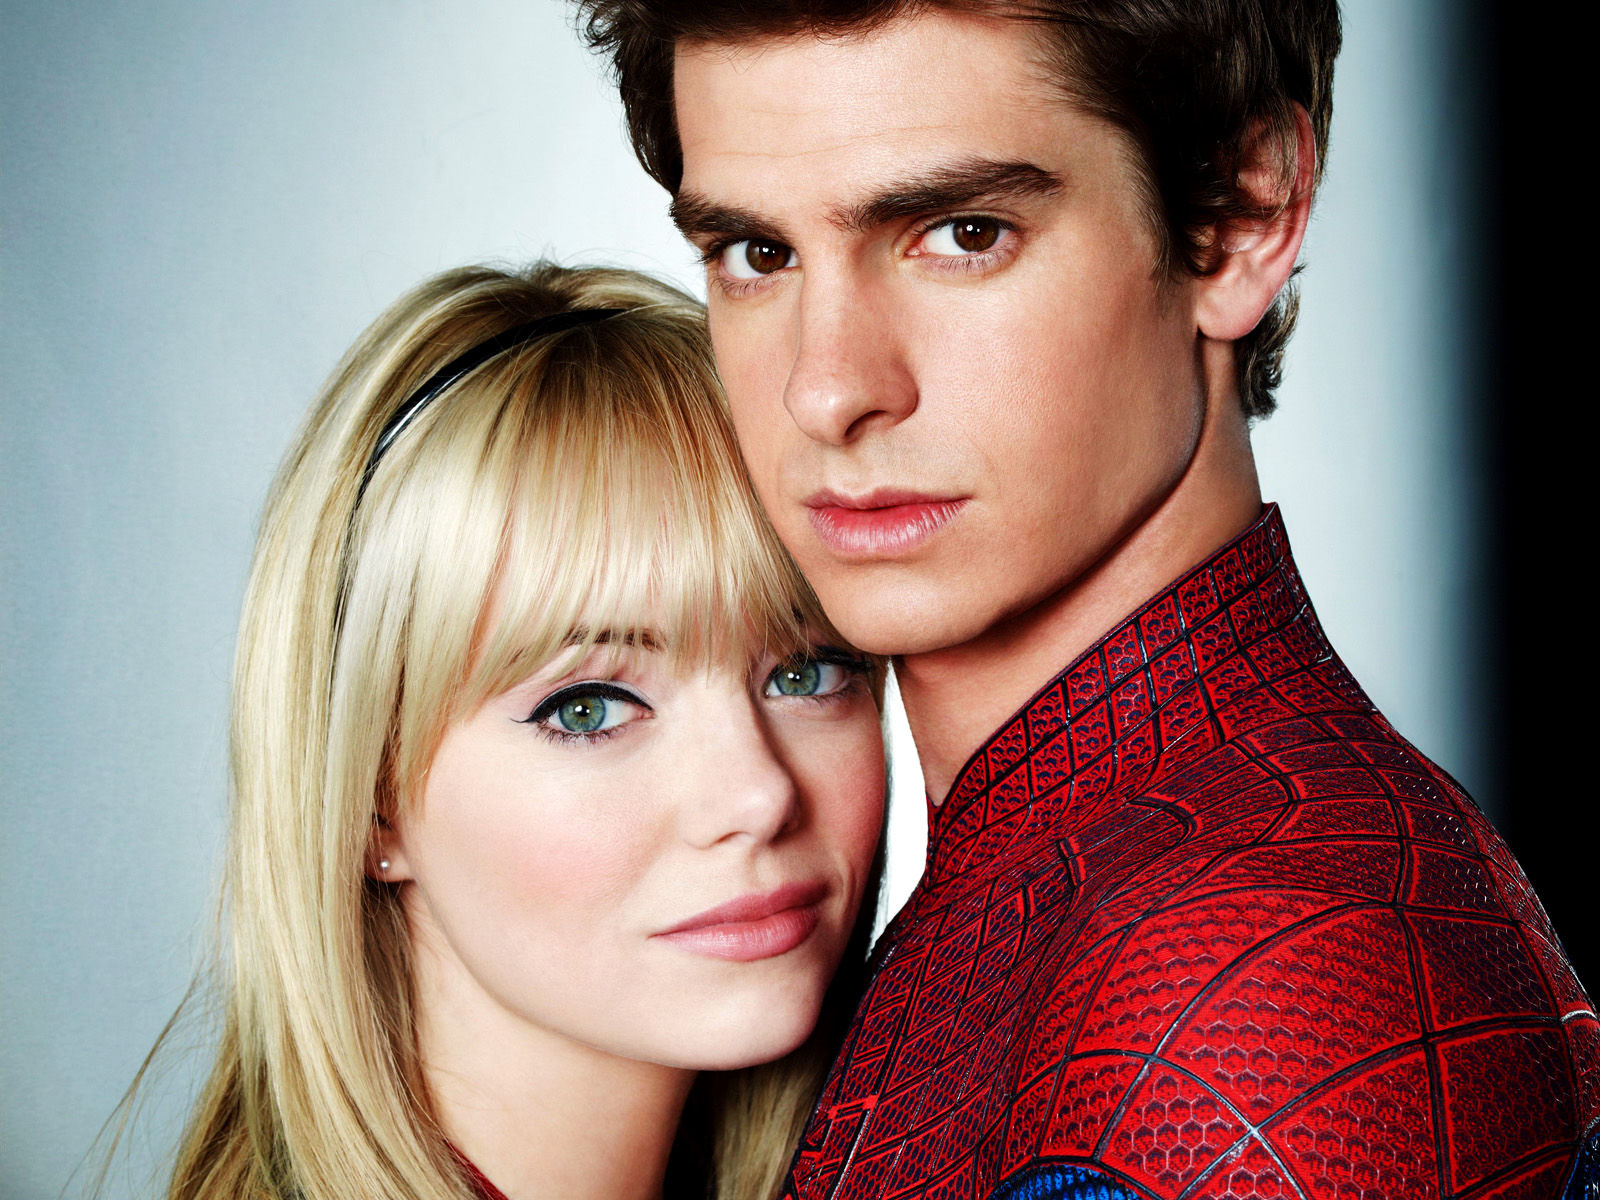 Central Wallpaper: The Amazing Spider-Man 4 HD Wallpapers and Posters